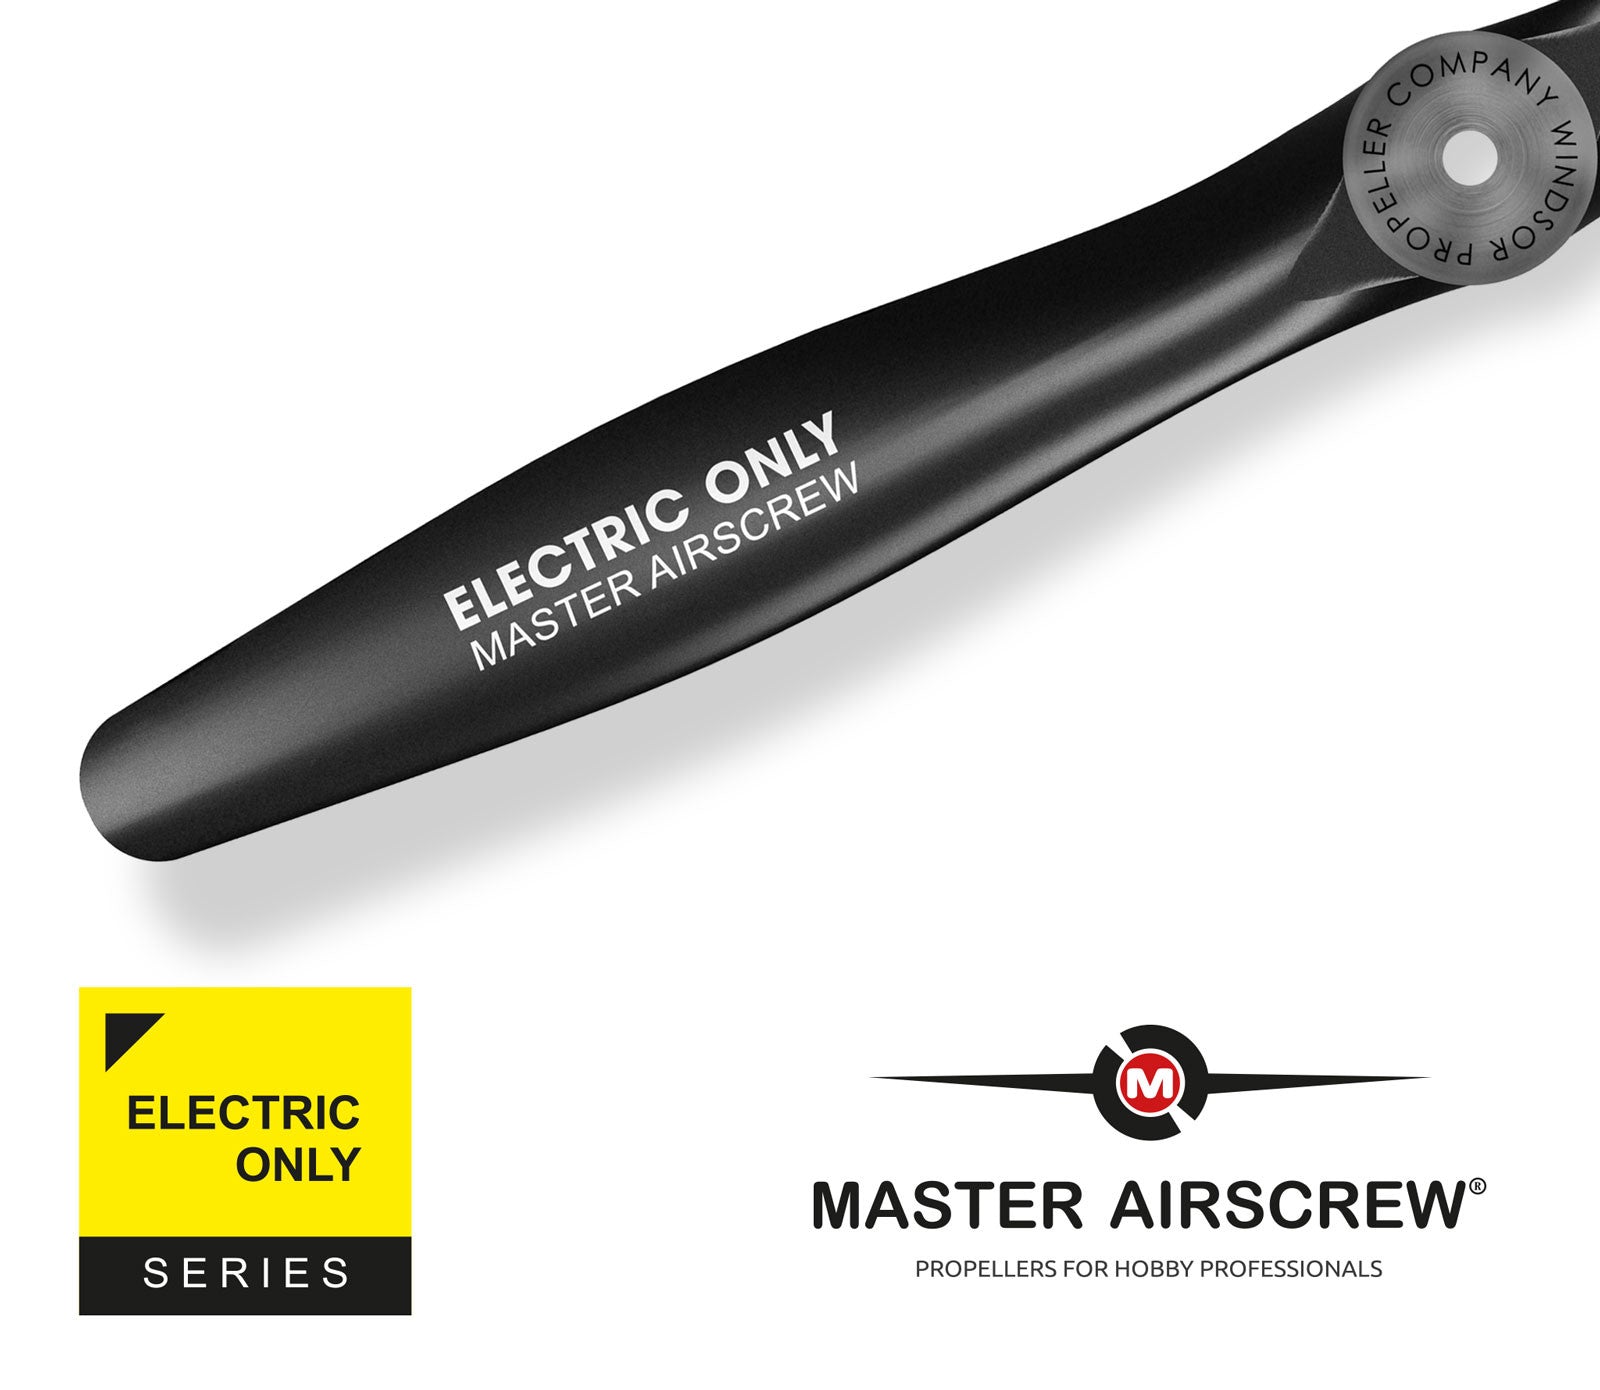 Electric Only - 9x6 Propeller - Master Airscrew